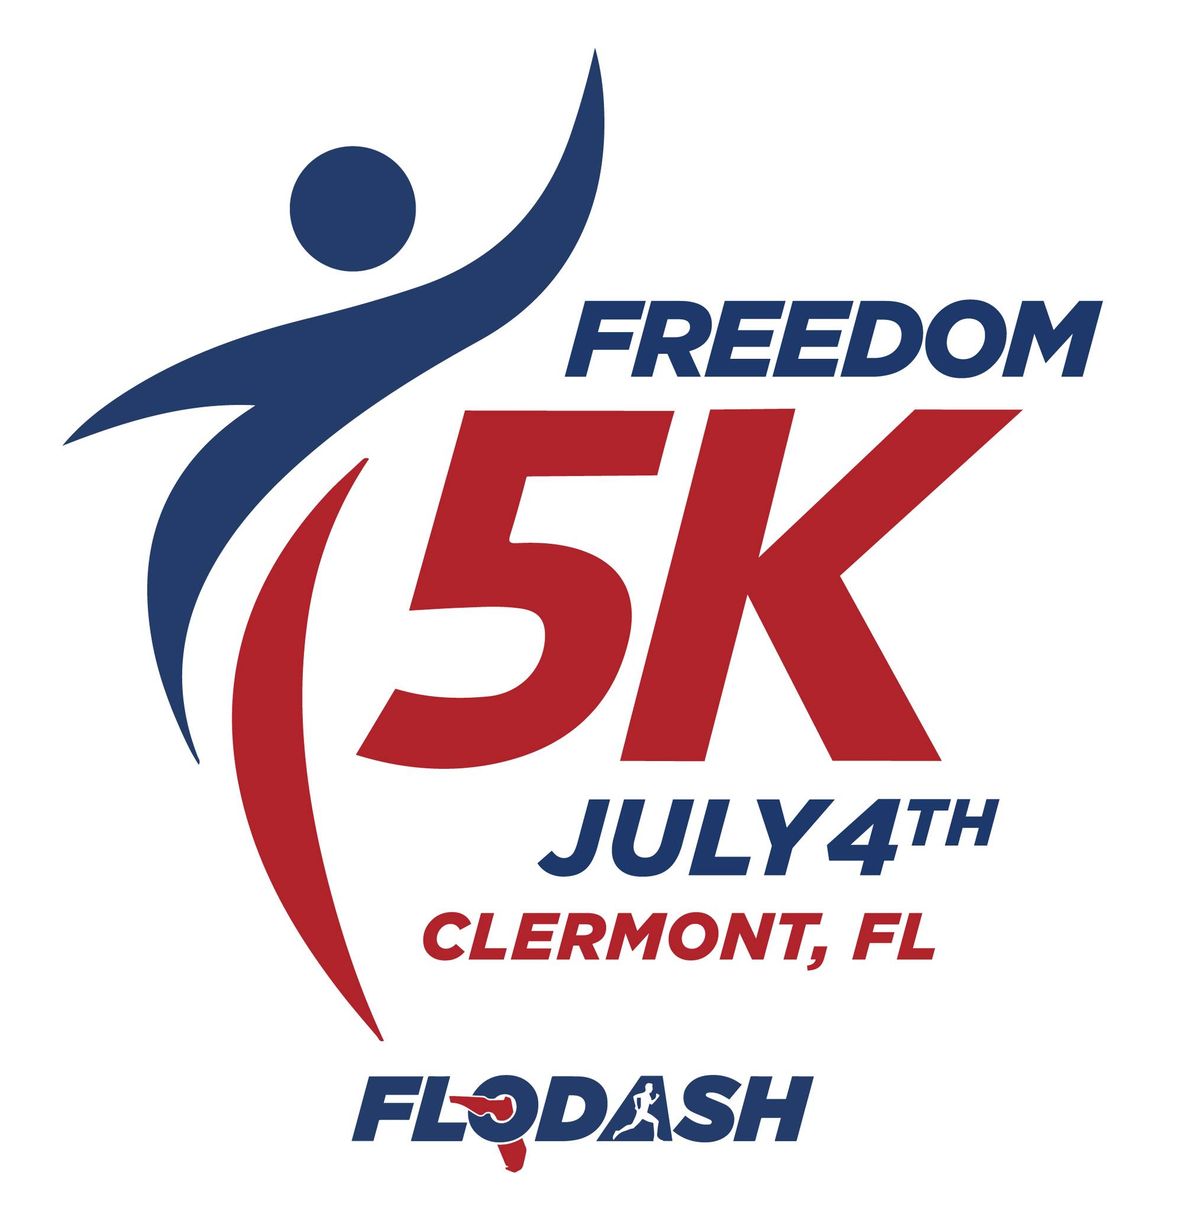 AdventHealth Clermont Freedom 5k presented by LiveTrends Design Group